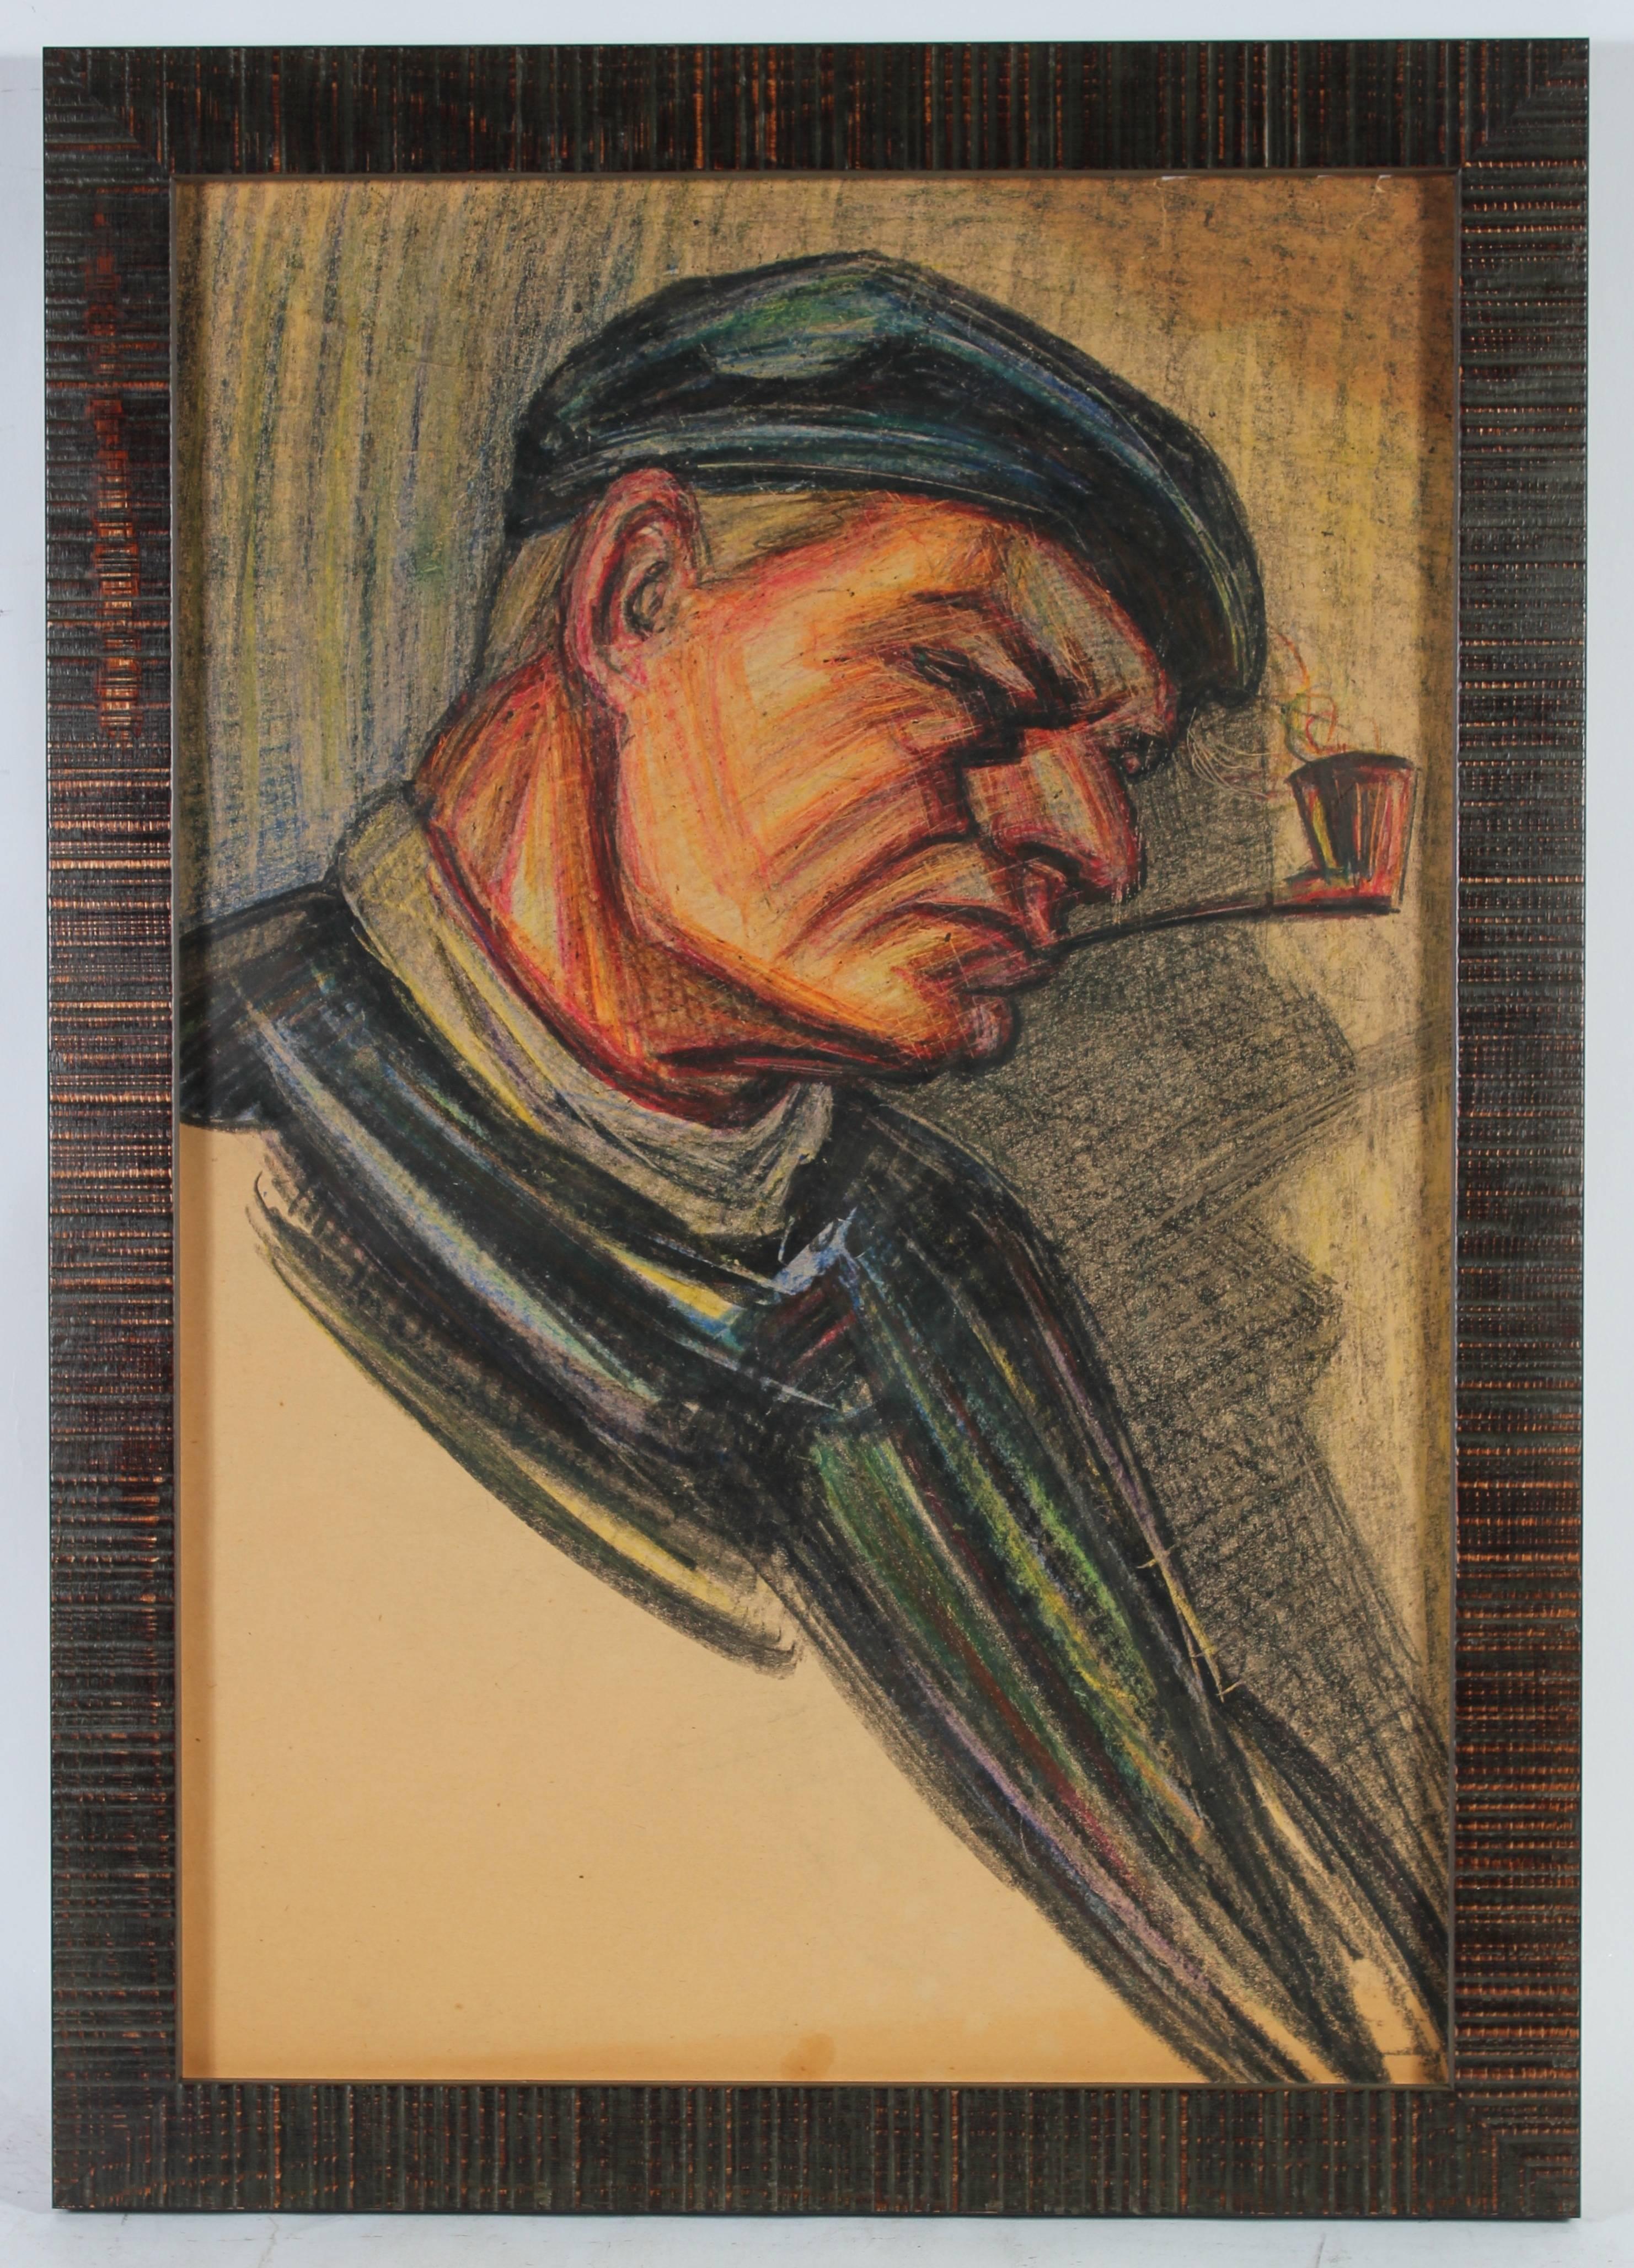 San Francisco Fisherman with Pipe, Oil Pastel Portrait, Circa 1940s - Art by Unknown